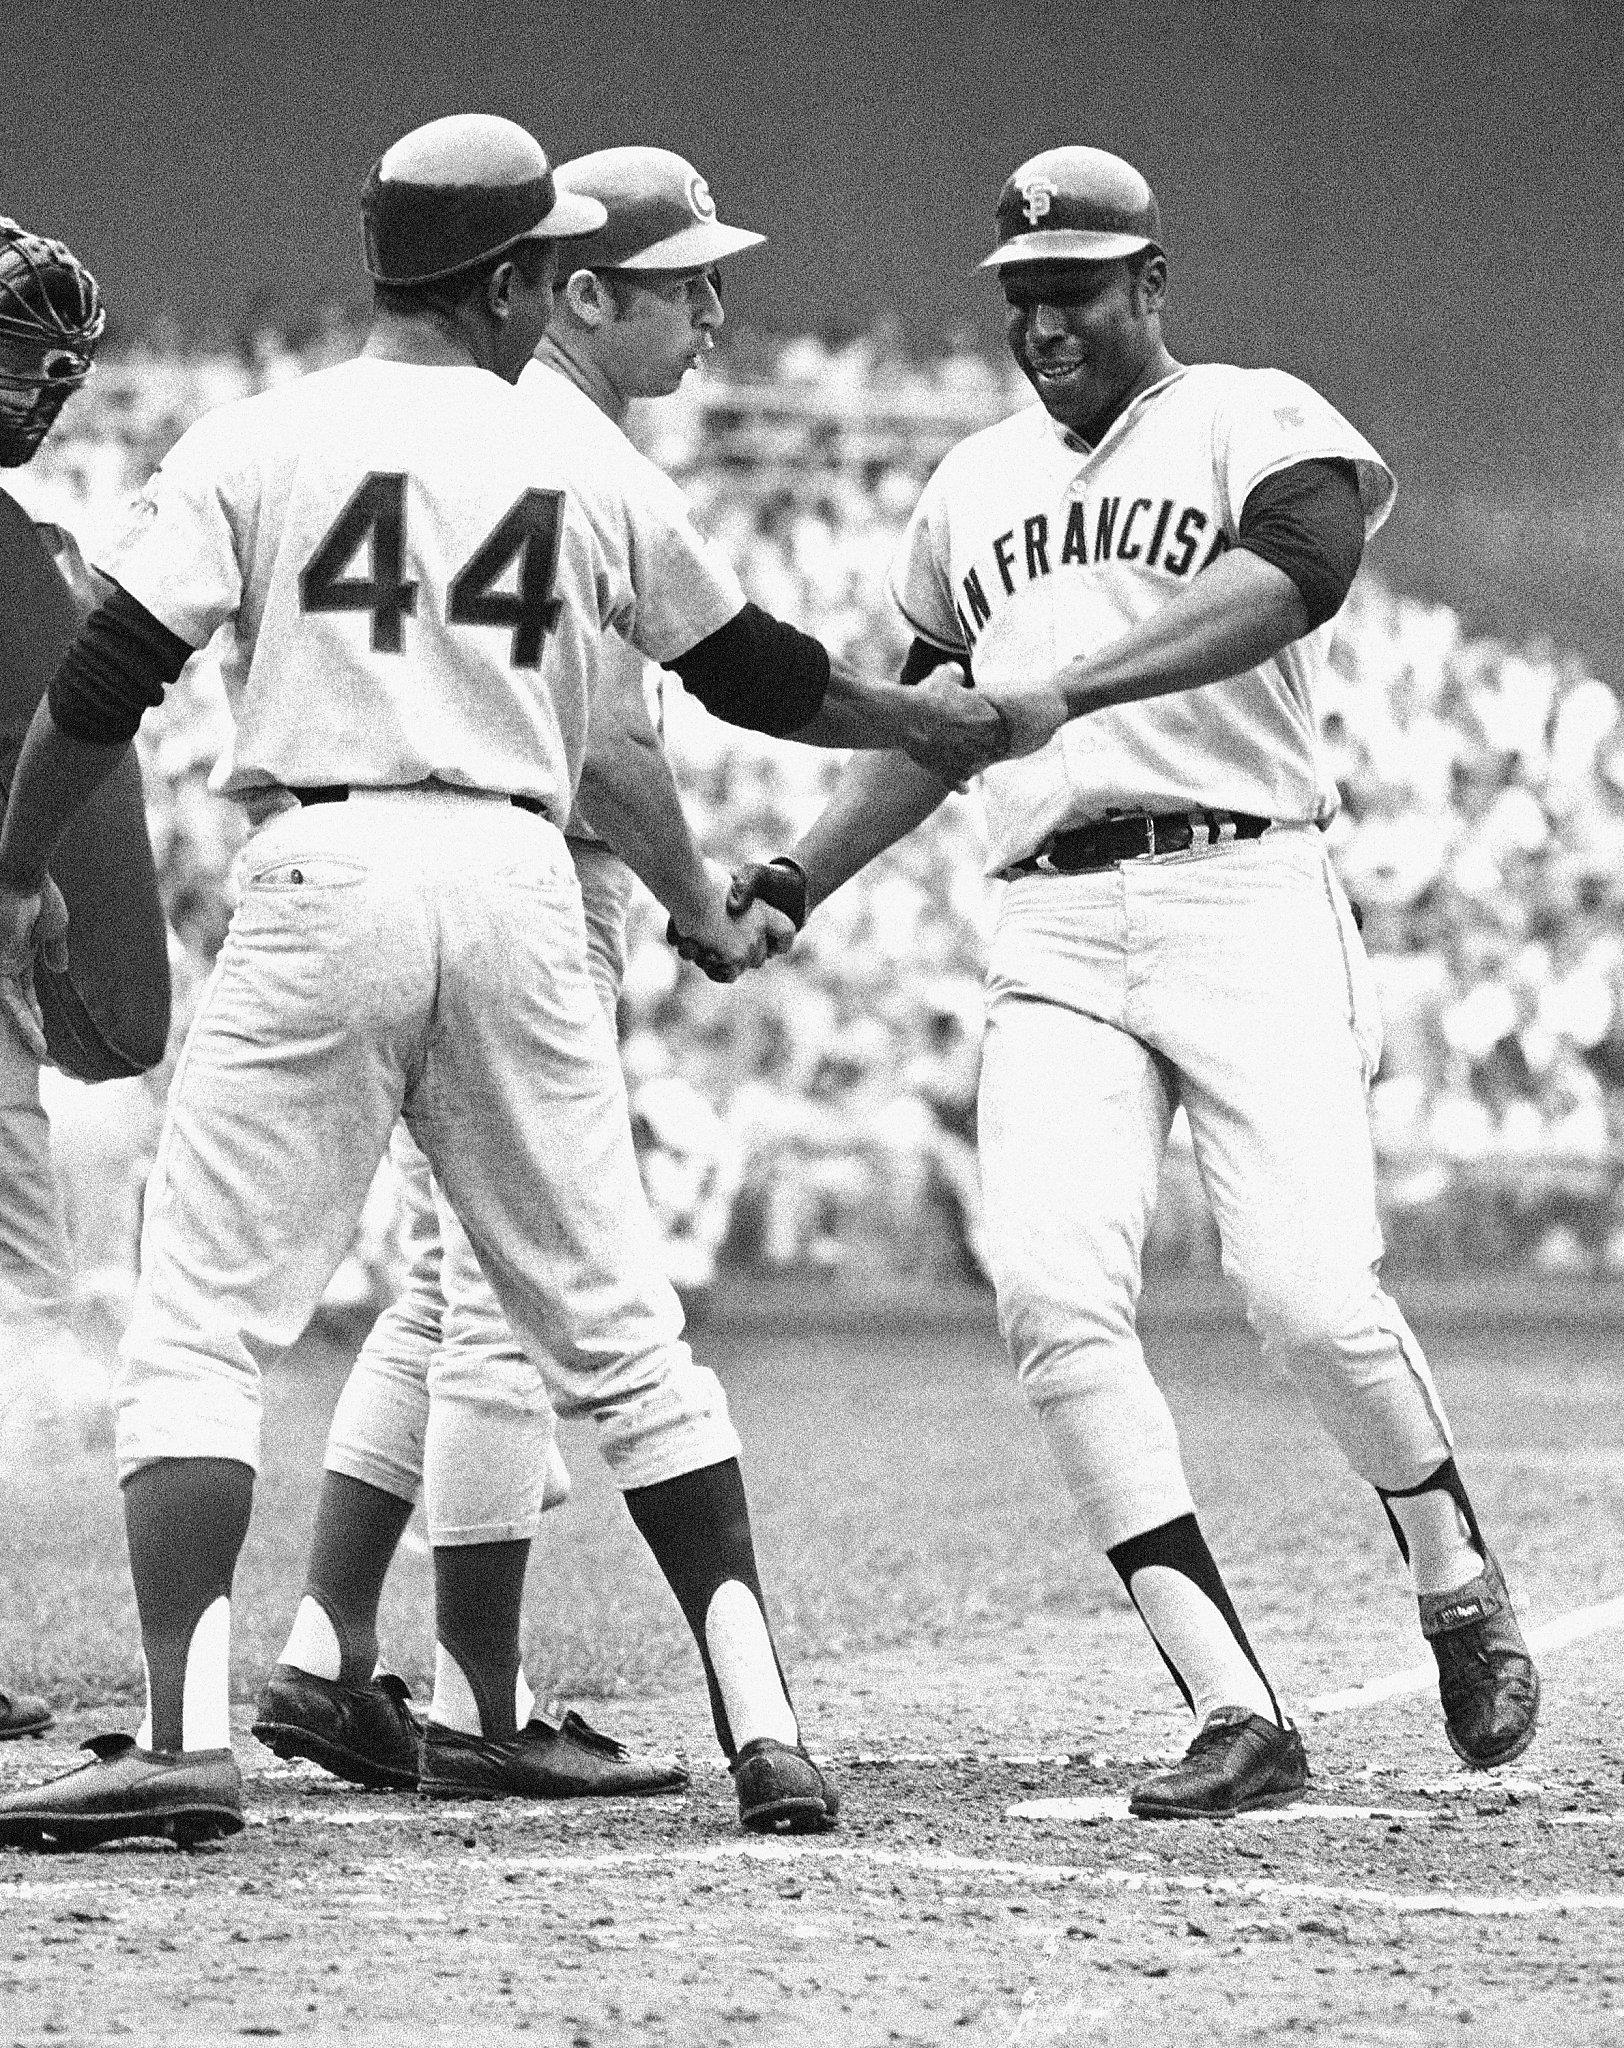 How Latinos influenced Willie McCovey's path to the majors